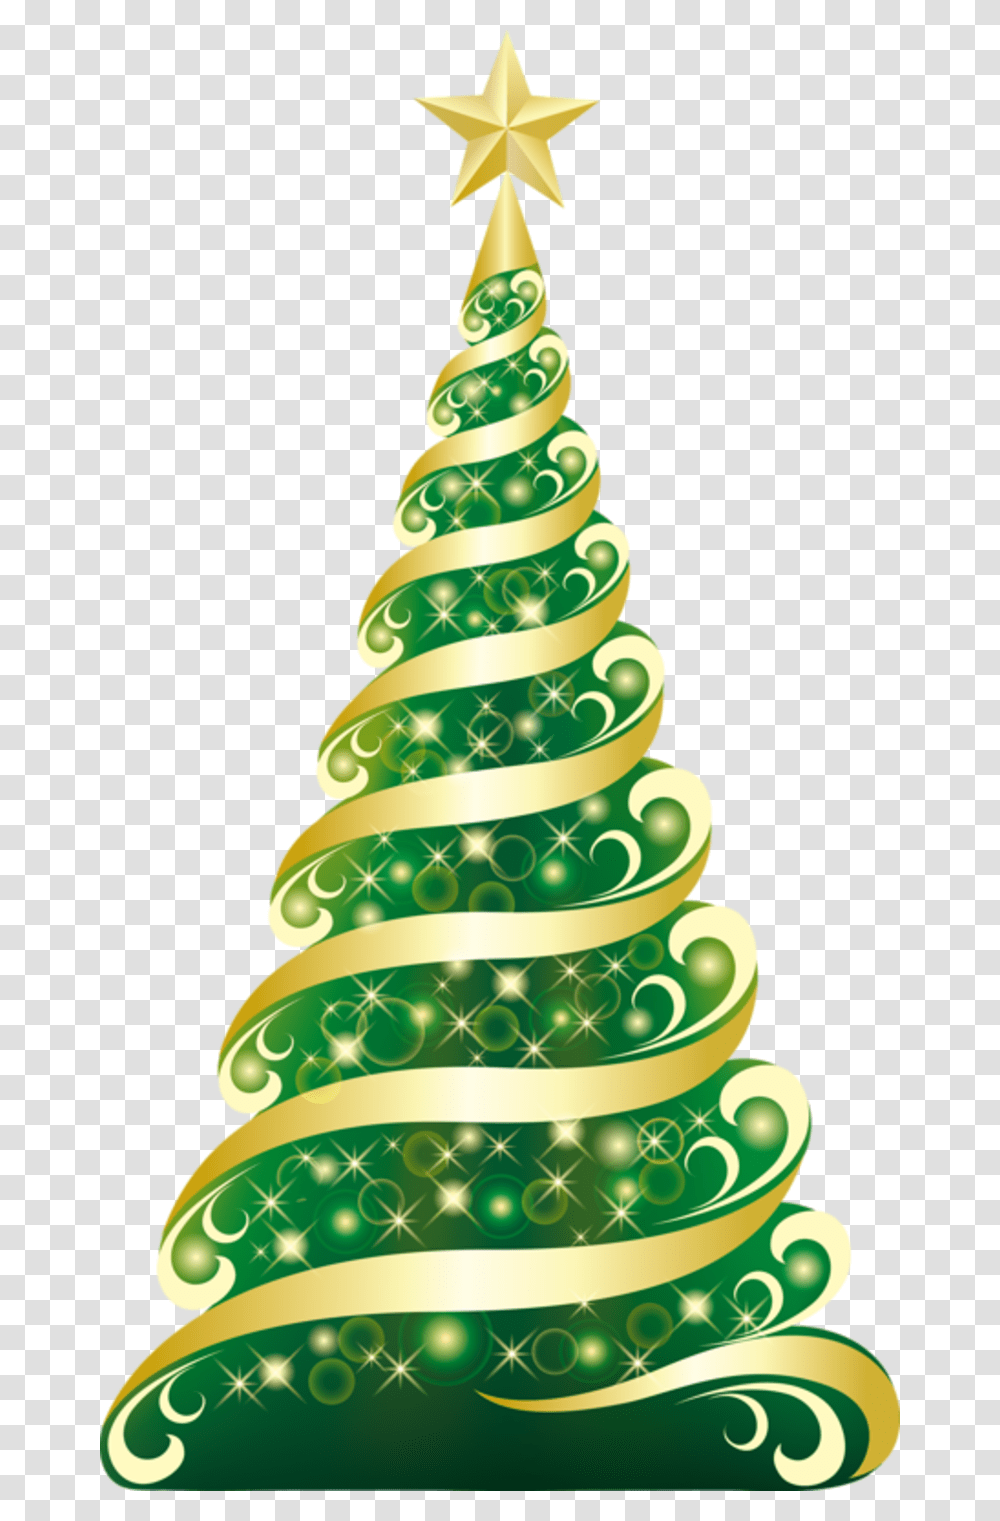 Merry Christmas Tree In, Wedding Cake, Dessert, Food, Plant Transparent Png